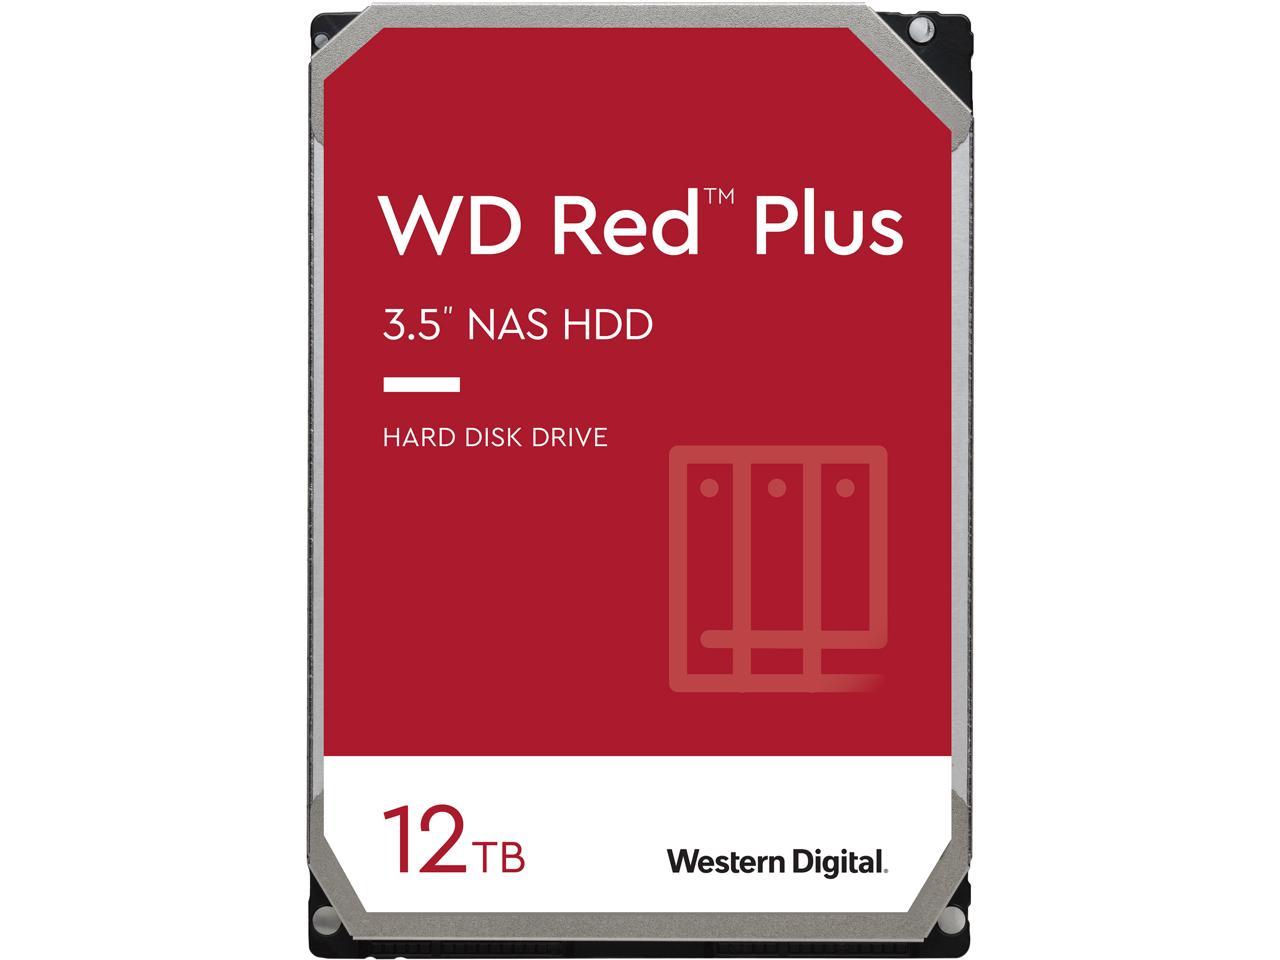 WD Red Plus 12TB 7200 RPM CMR 256MB Cache - $300 - 60 Promo Code $240 at Newegg